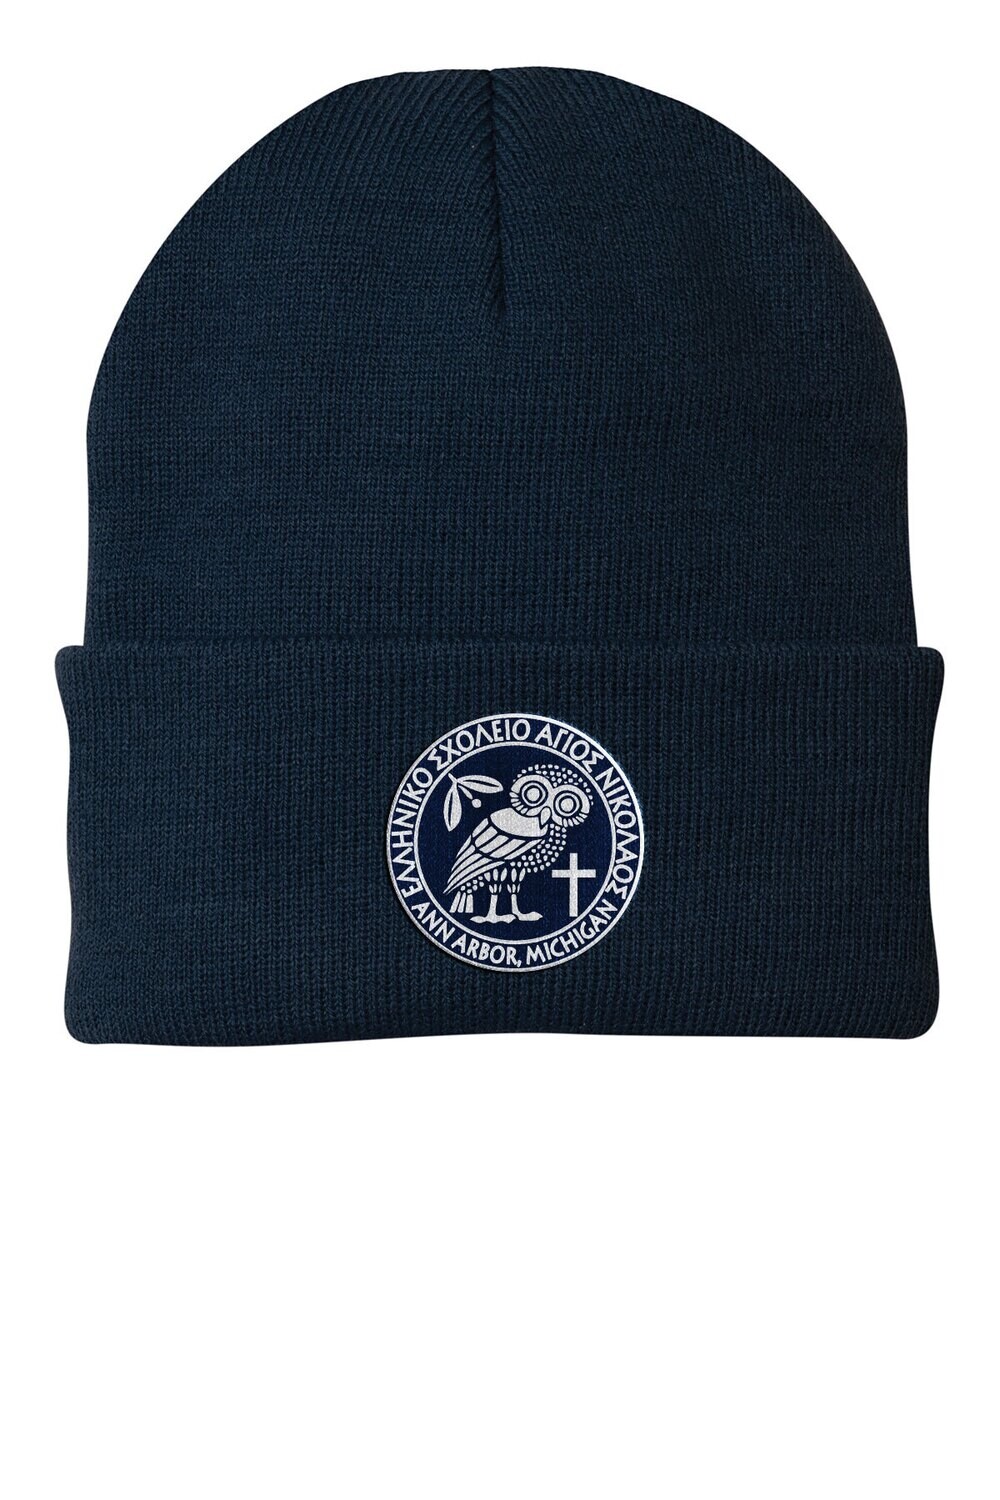 Knit Beanie (One Size Fits Most) - Navy/White